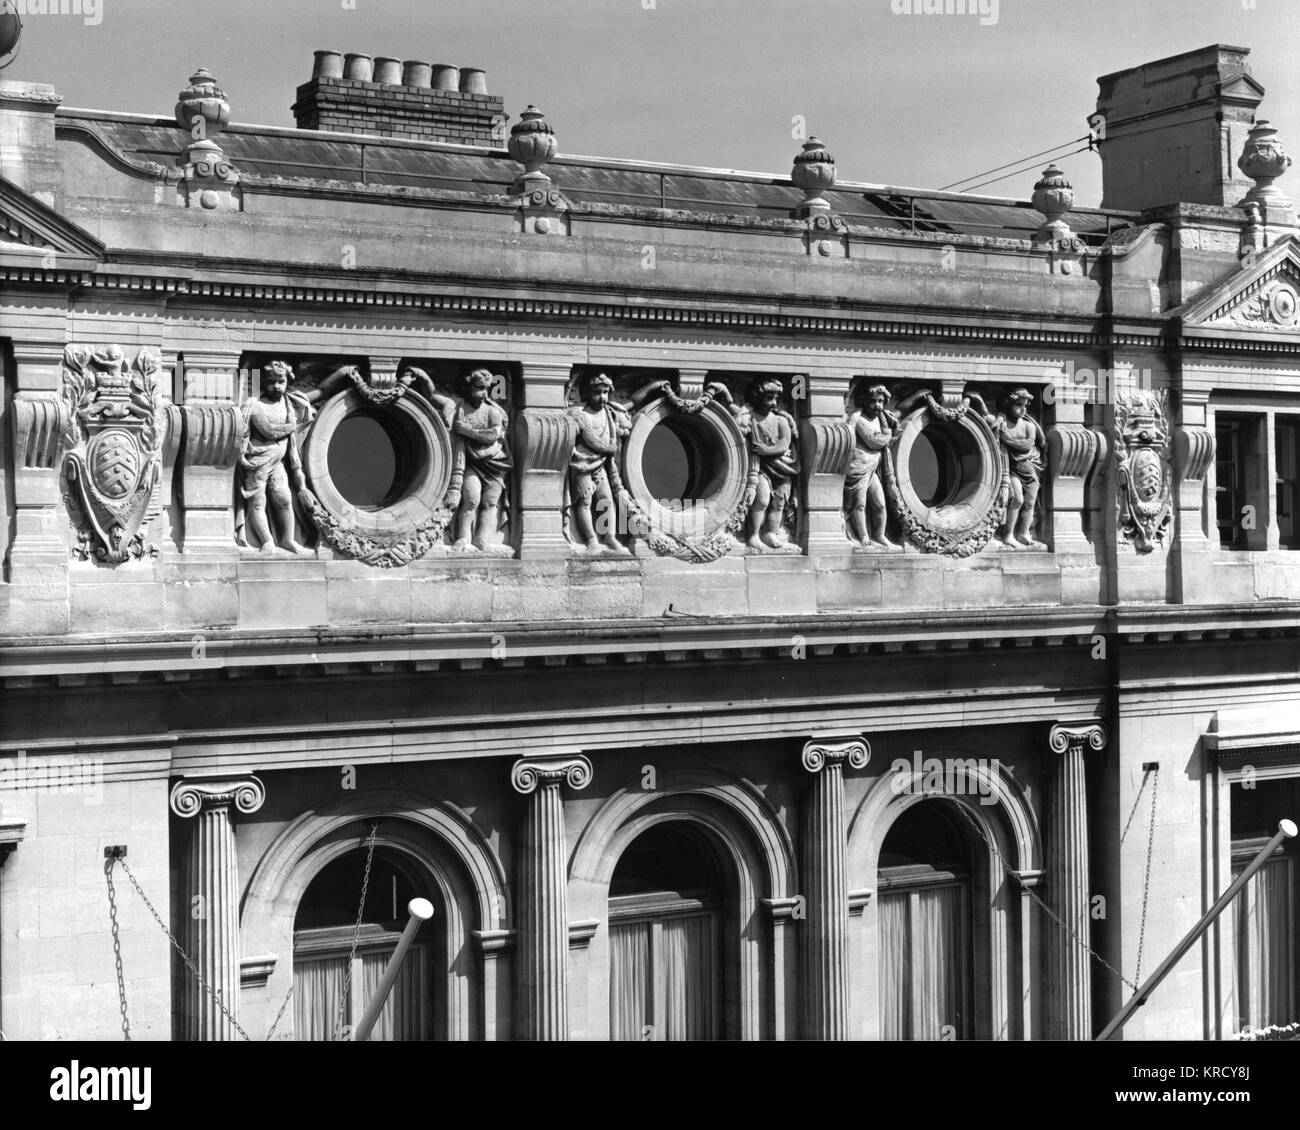 A Neo Classical frieze on the  facade of Gloucester  Guildhall, Gloucestershire,  England, decorated with  Ionic fluted columns and  cherubs bearing wreaths.     Date: built 1890s Stock Photo